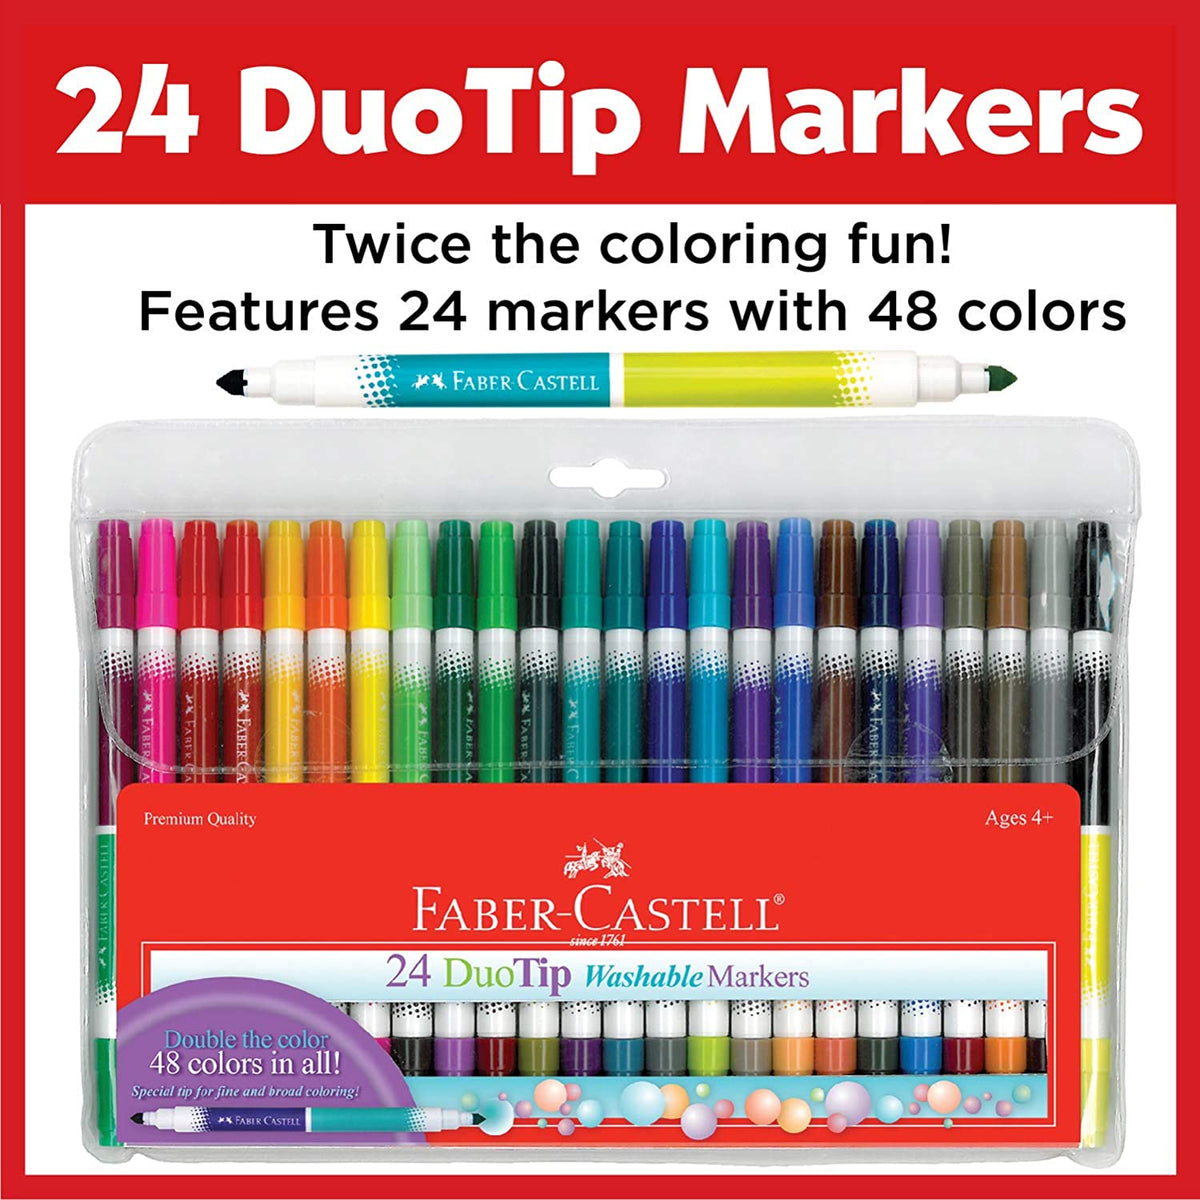 12 ct Duo Tip Washable Markers (24 colors total) - Faber-Castell